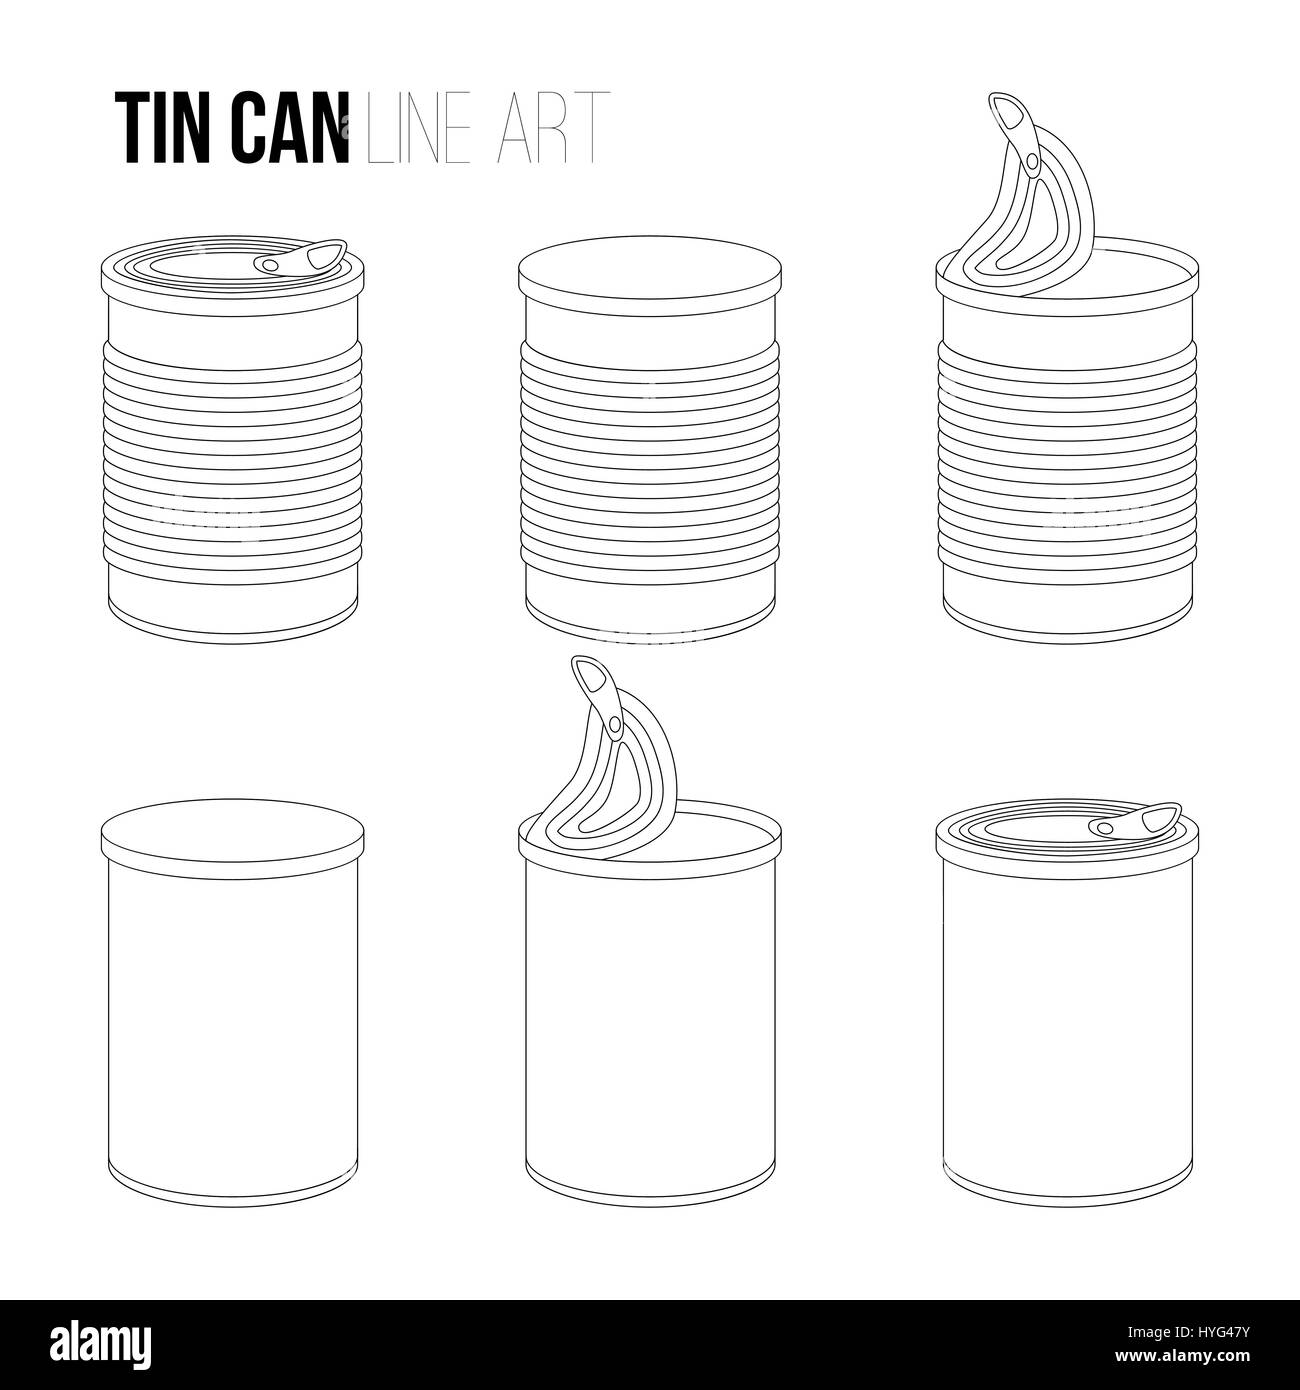 Tincan, canned food line art icons isolated on white tin. Outlines objects set Stock Vector